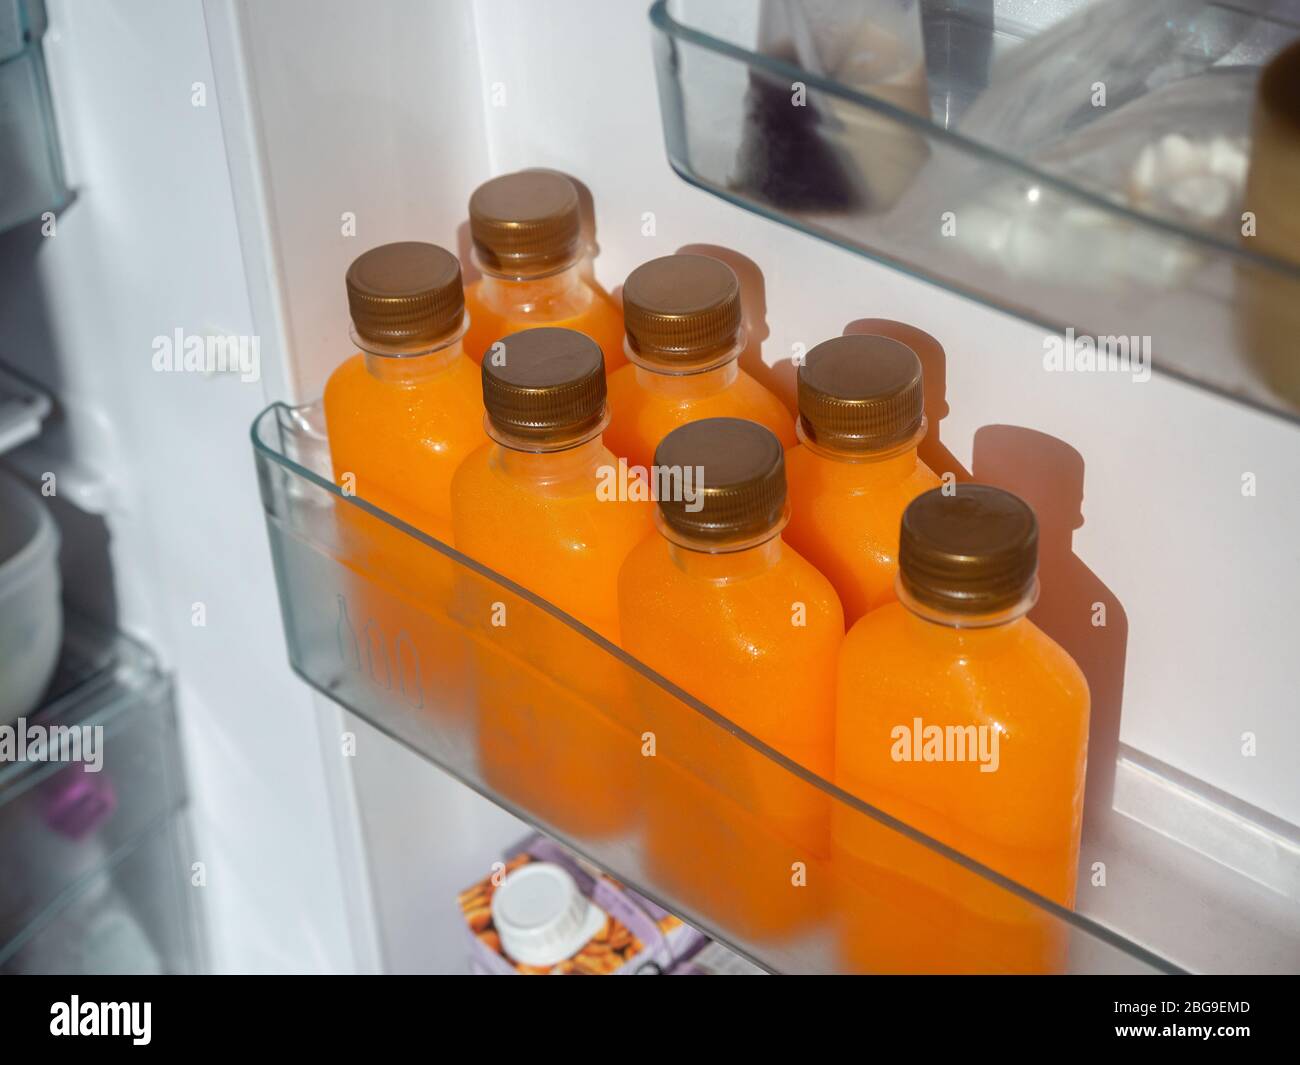 Orange juice iced cold in the bottles on shelf in refrigerator. Square shape bottle with cold orange juice, top view. Stock Photo